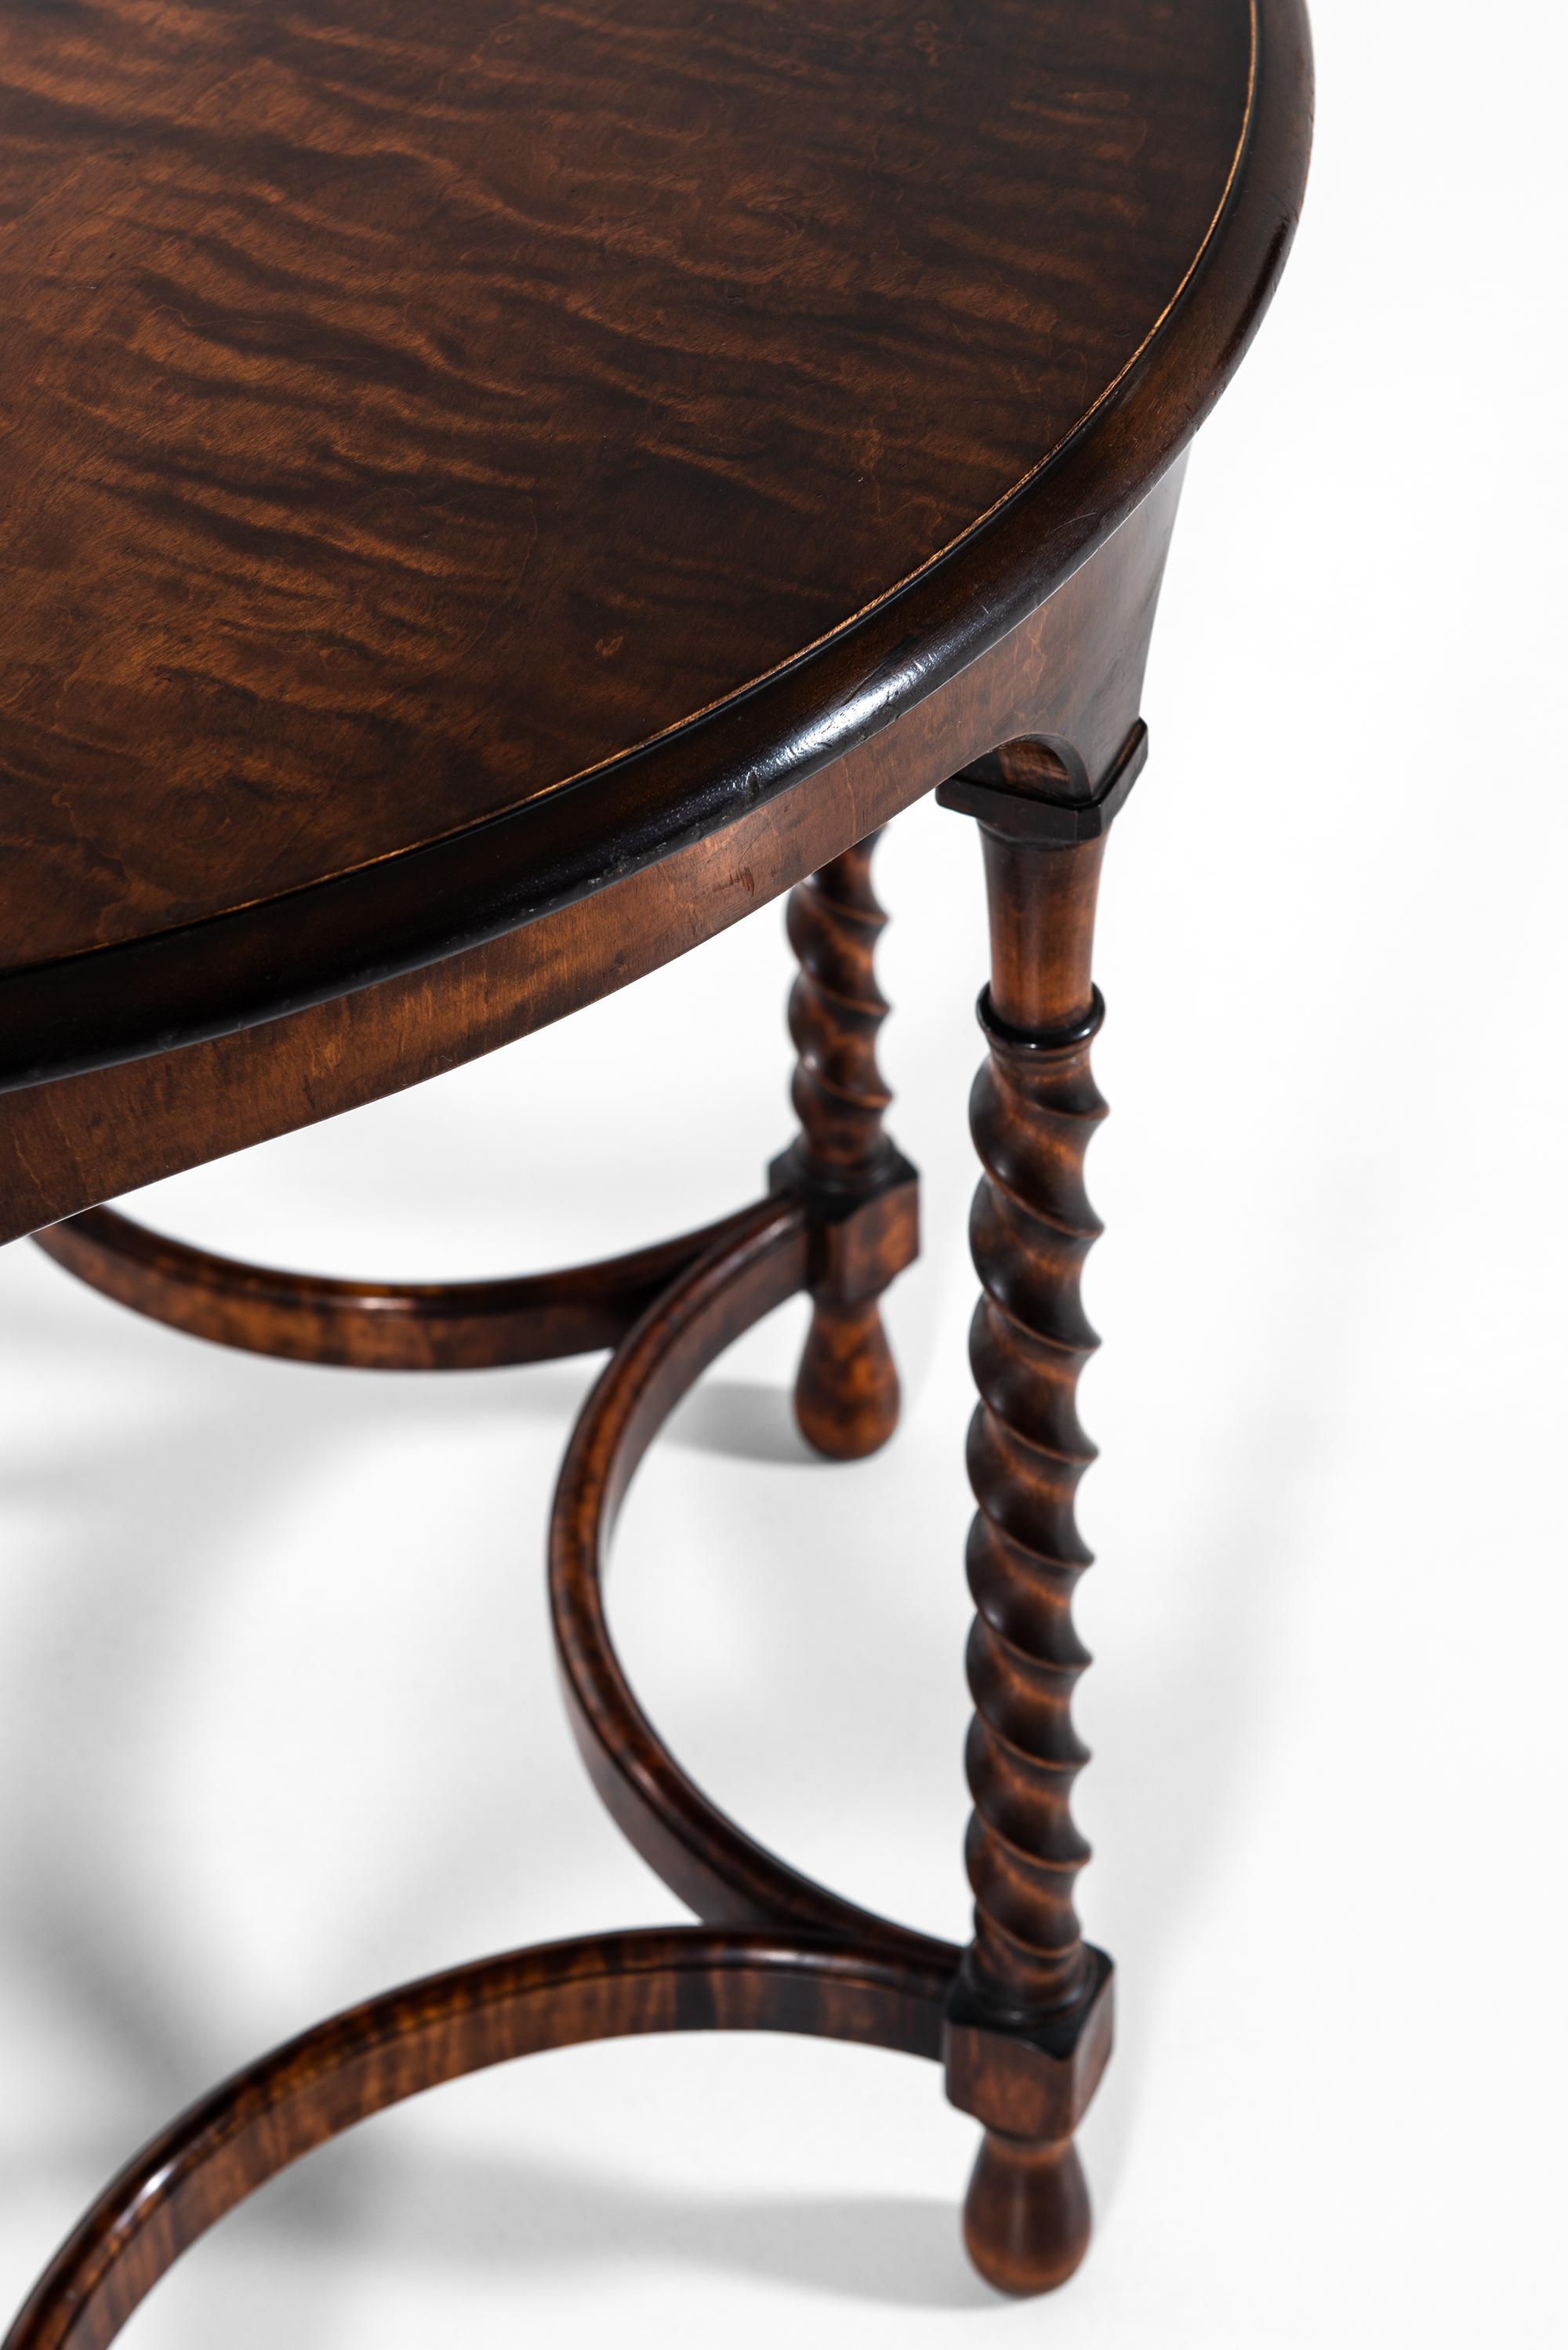 Scandinavian Modern Center Table in Dark Stained Beech in the Manner of Axel Einar Hjorth